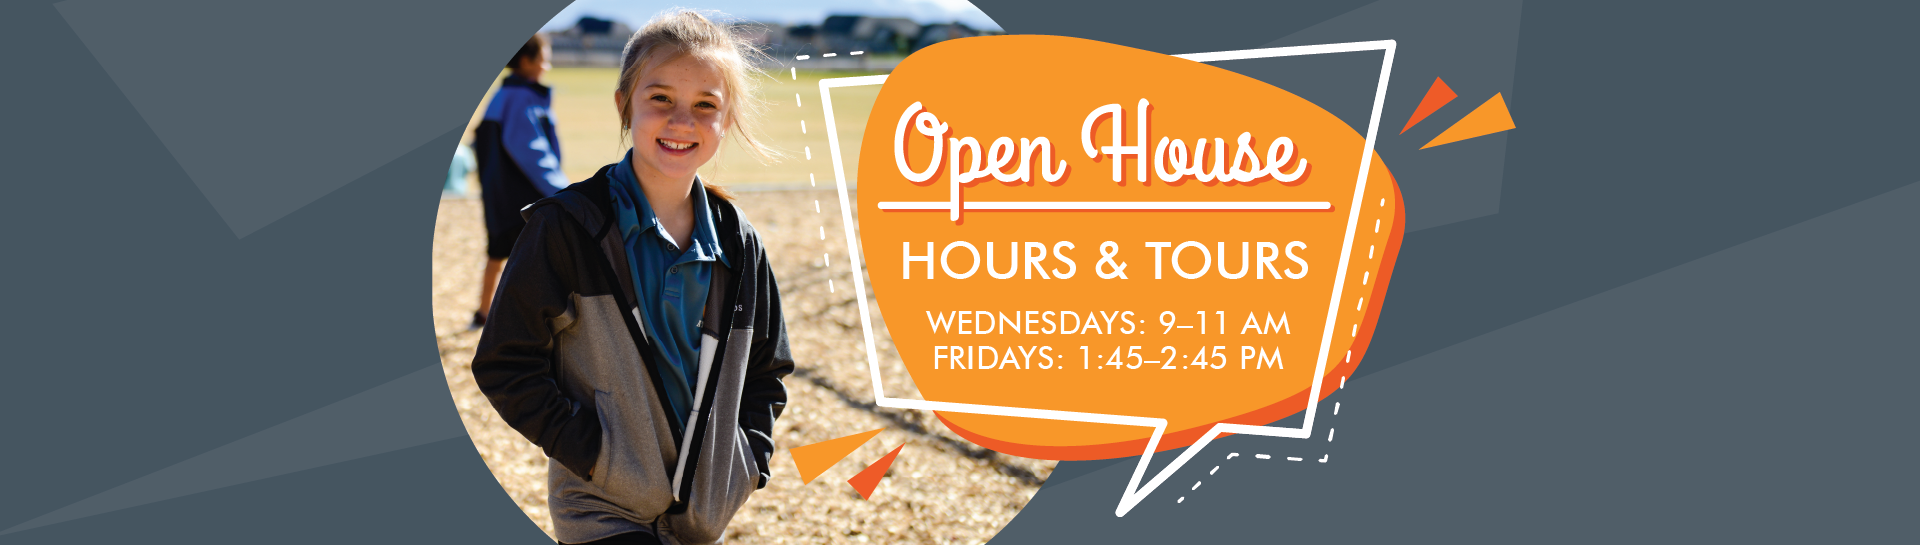 Open House Hours & Tours